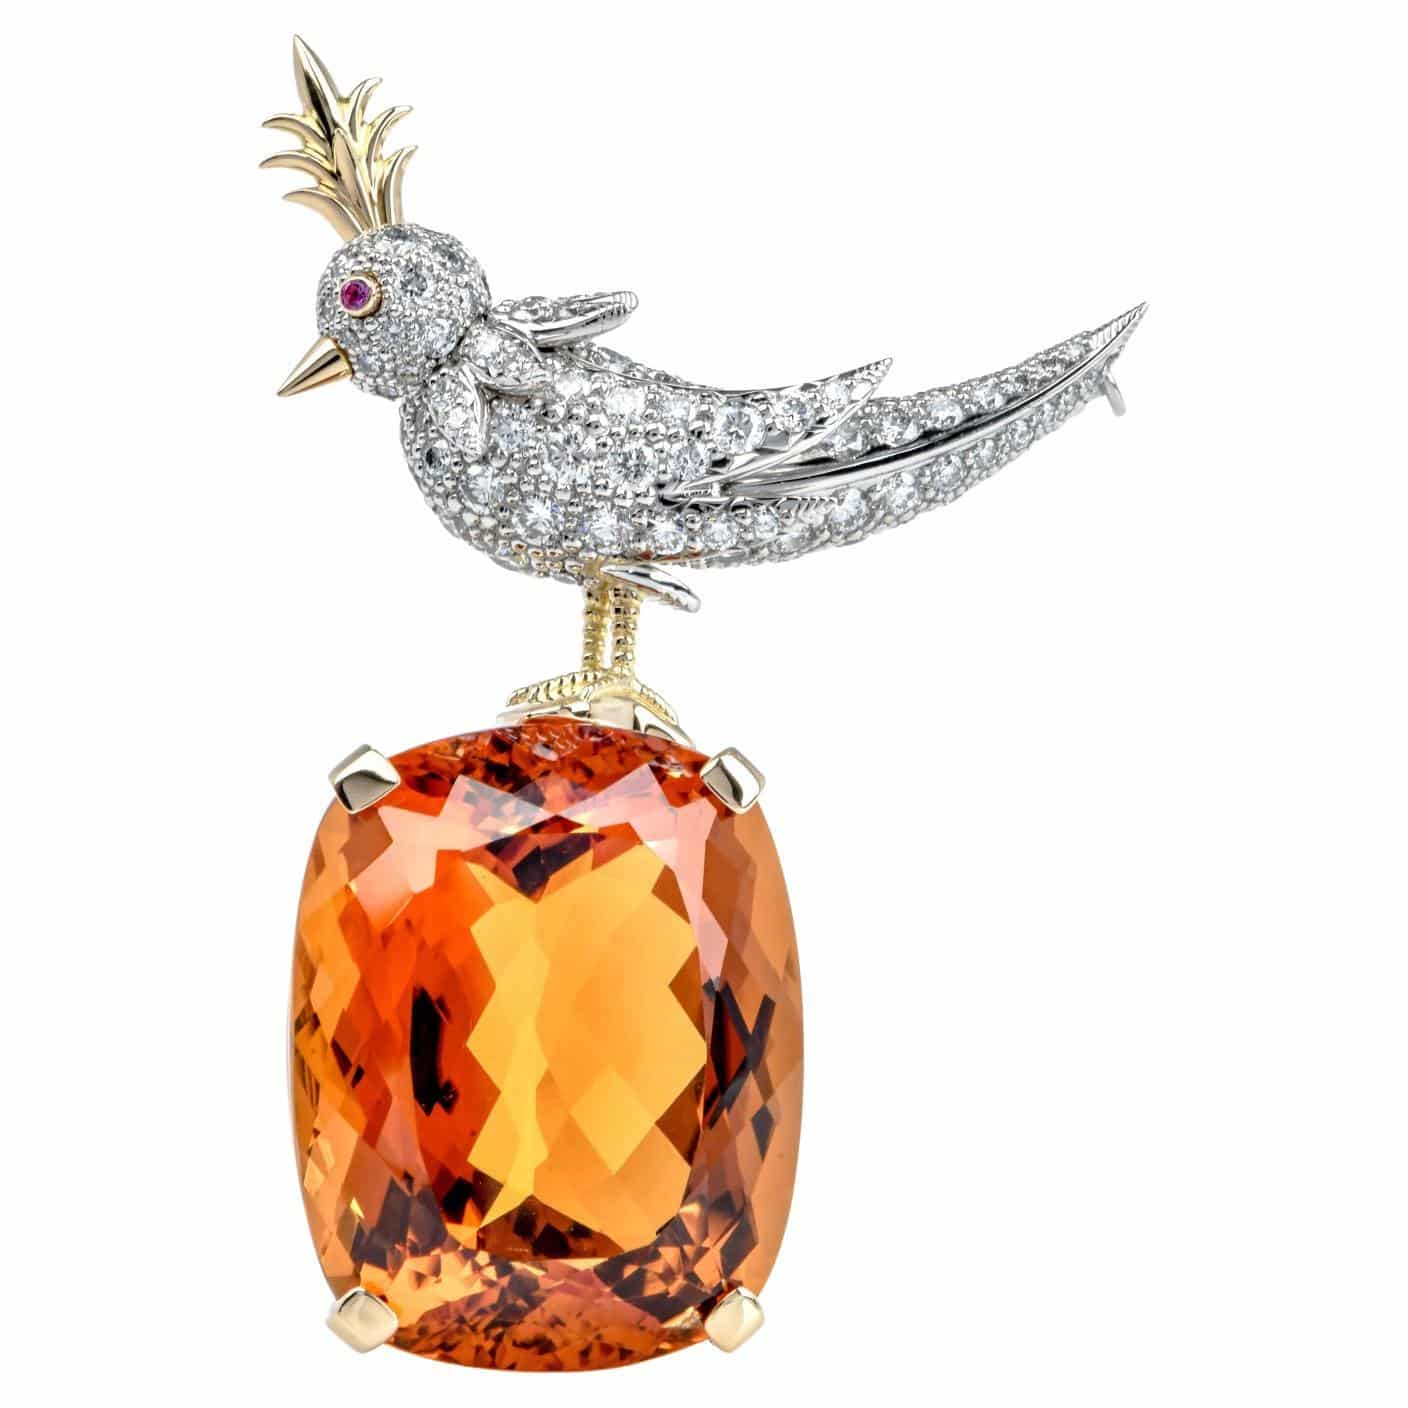 At Dover Jewelry, Expect to Find Rare Gems from Tiffany & Co., Buccellati, Cartier and More